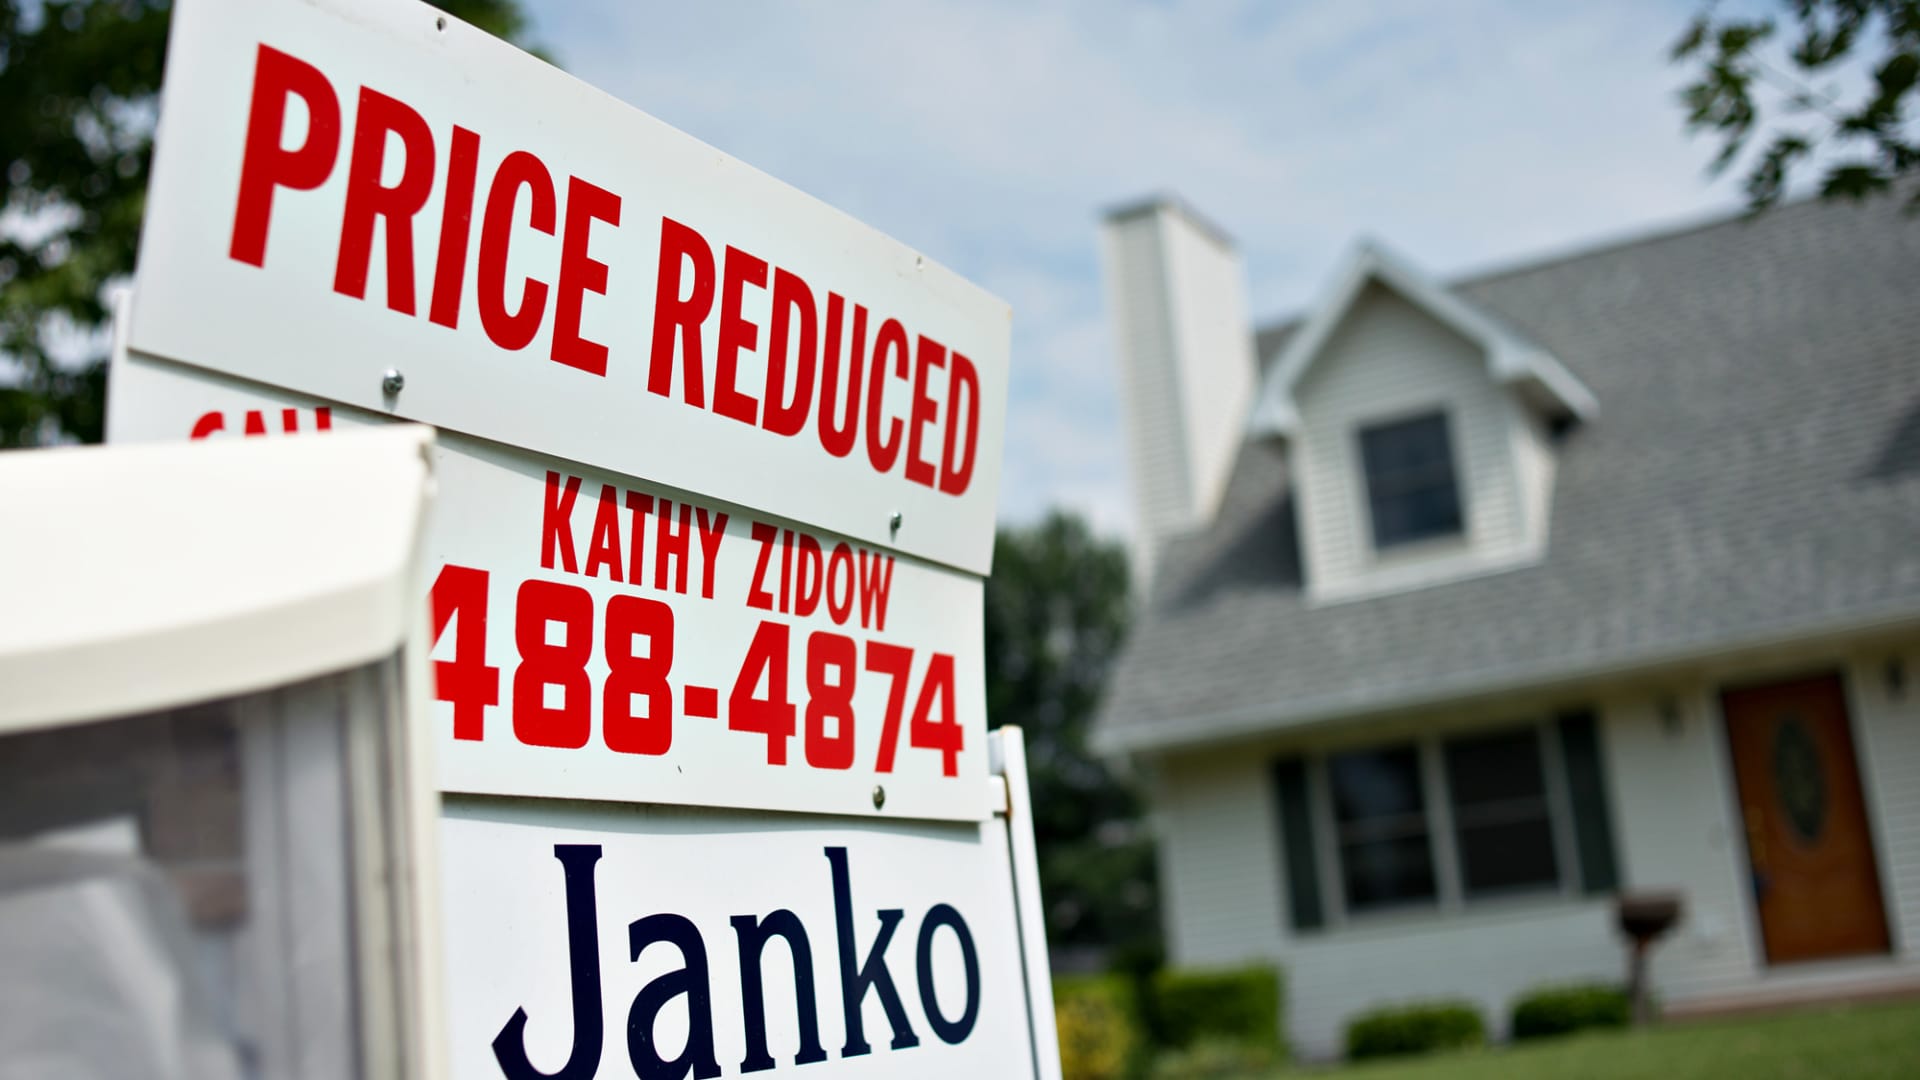 What’s happening with home prices? Mortgage rates, tight supply are factors